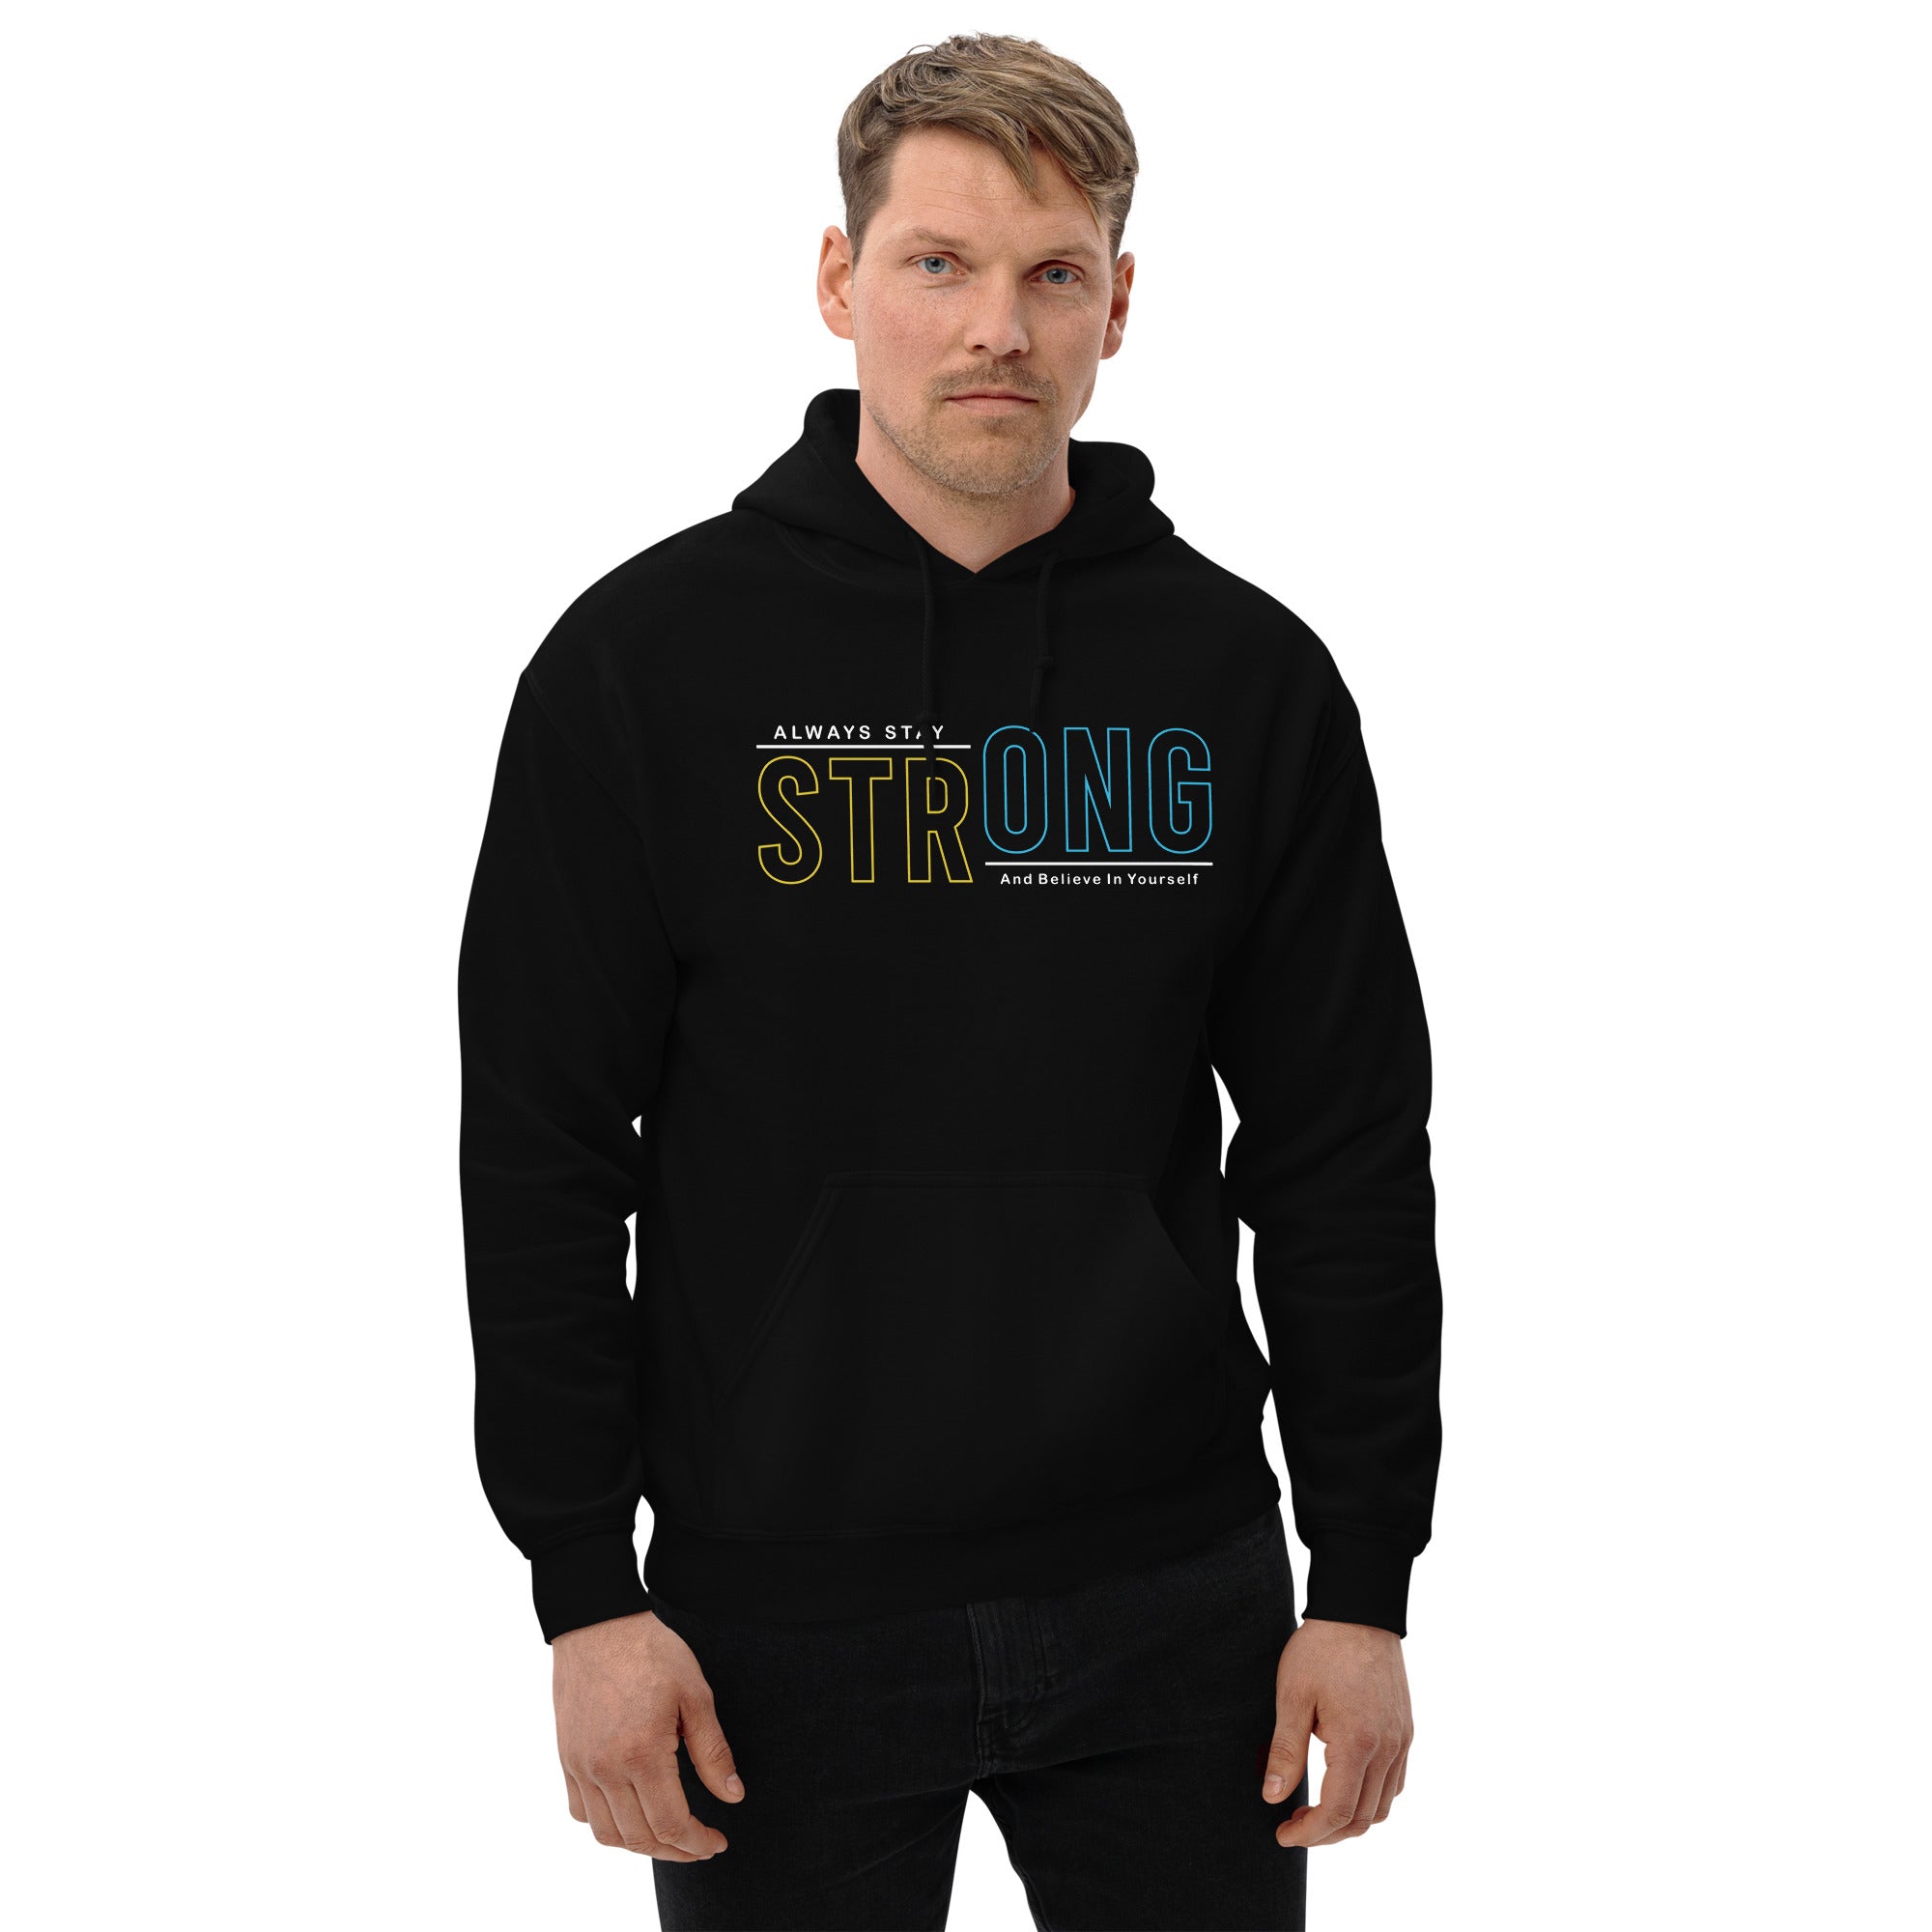 Stay Strong - Unisex Hoodie